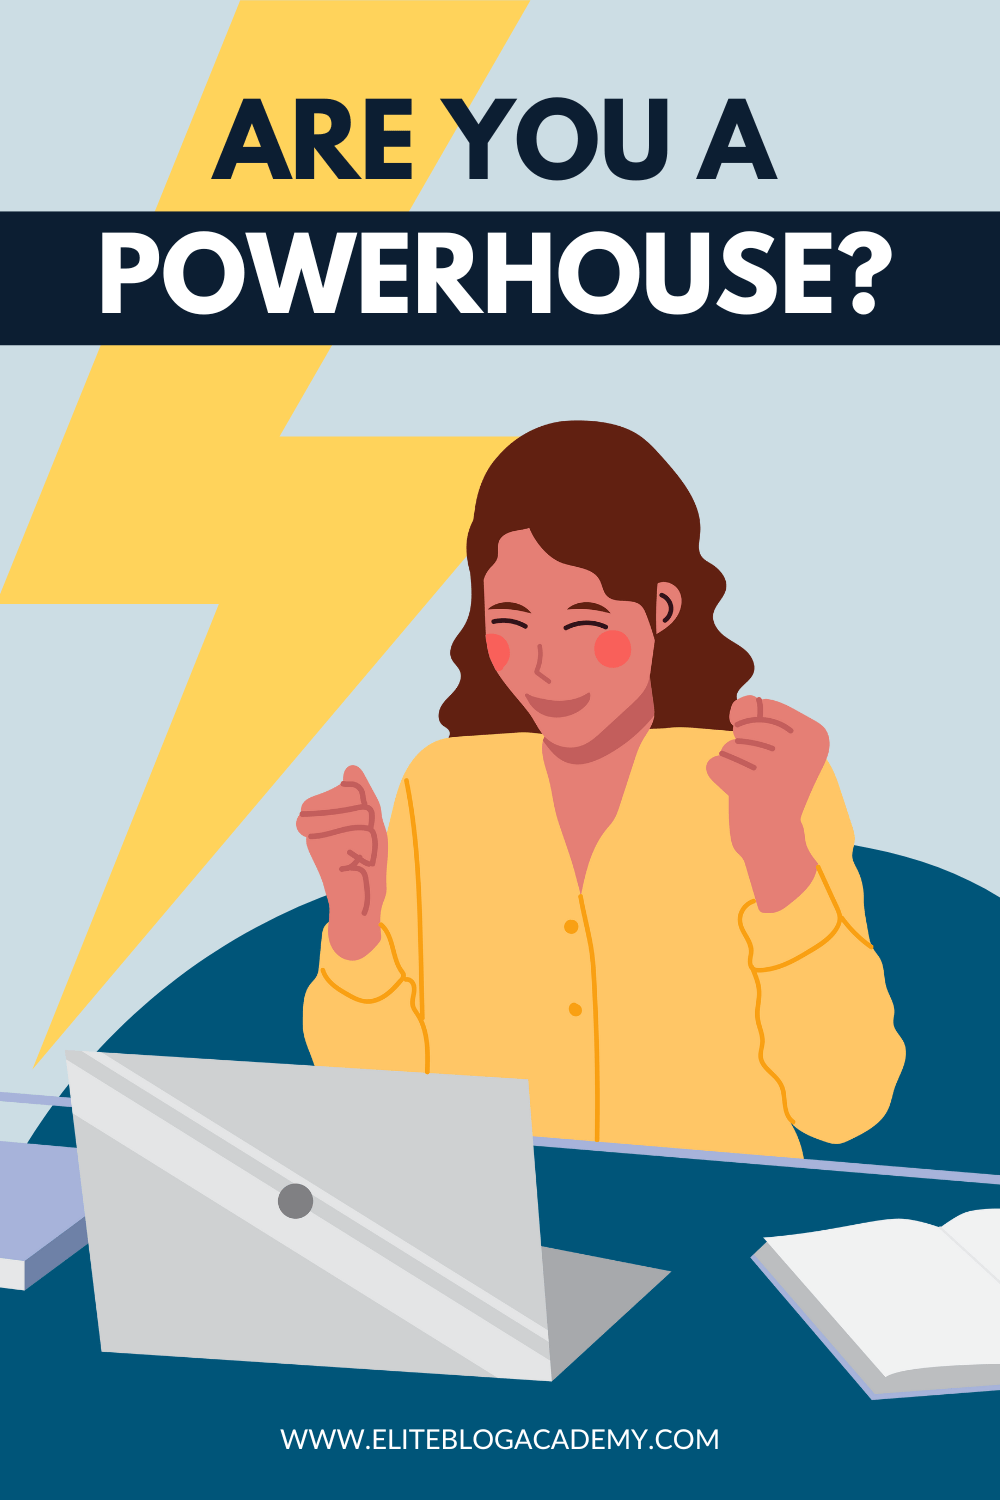 Are you a Powerhouse?